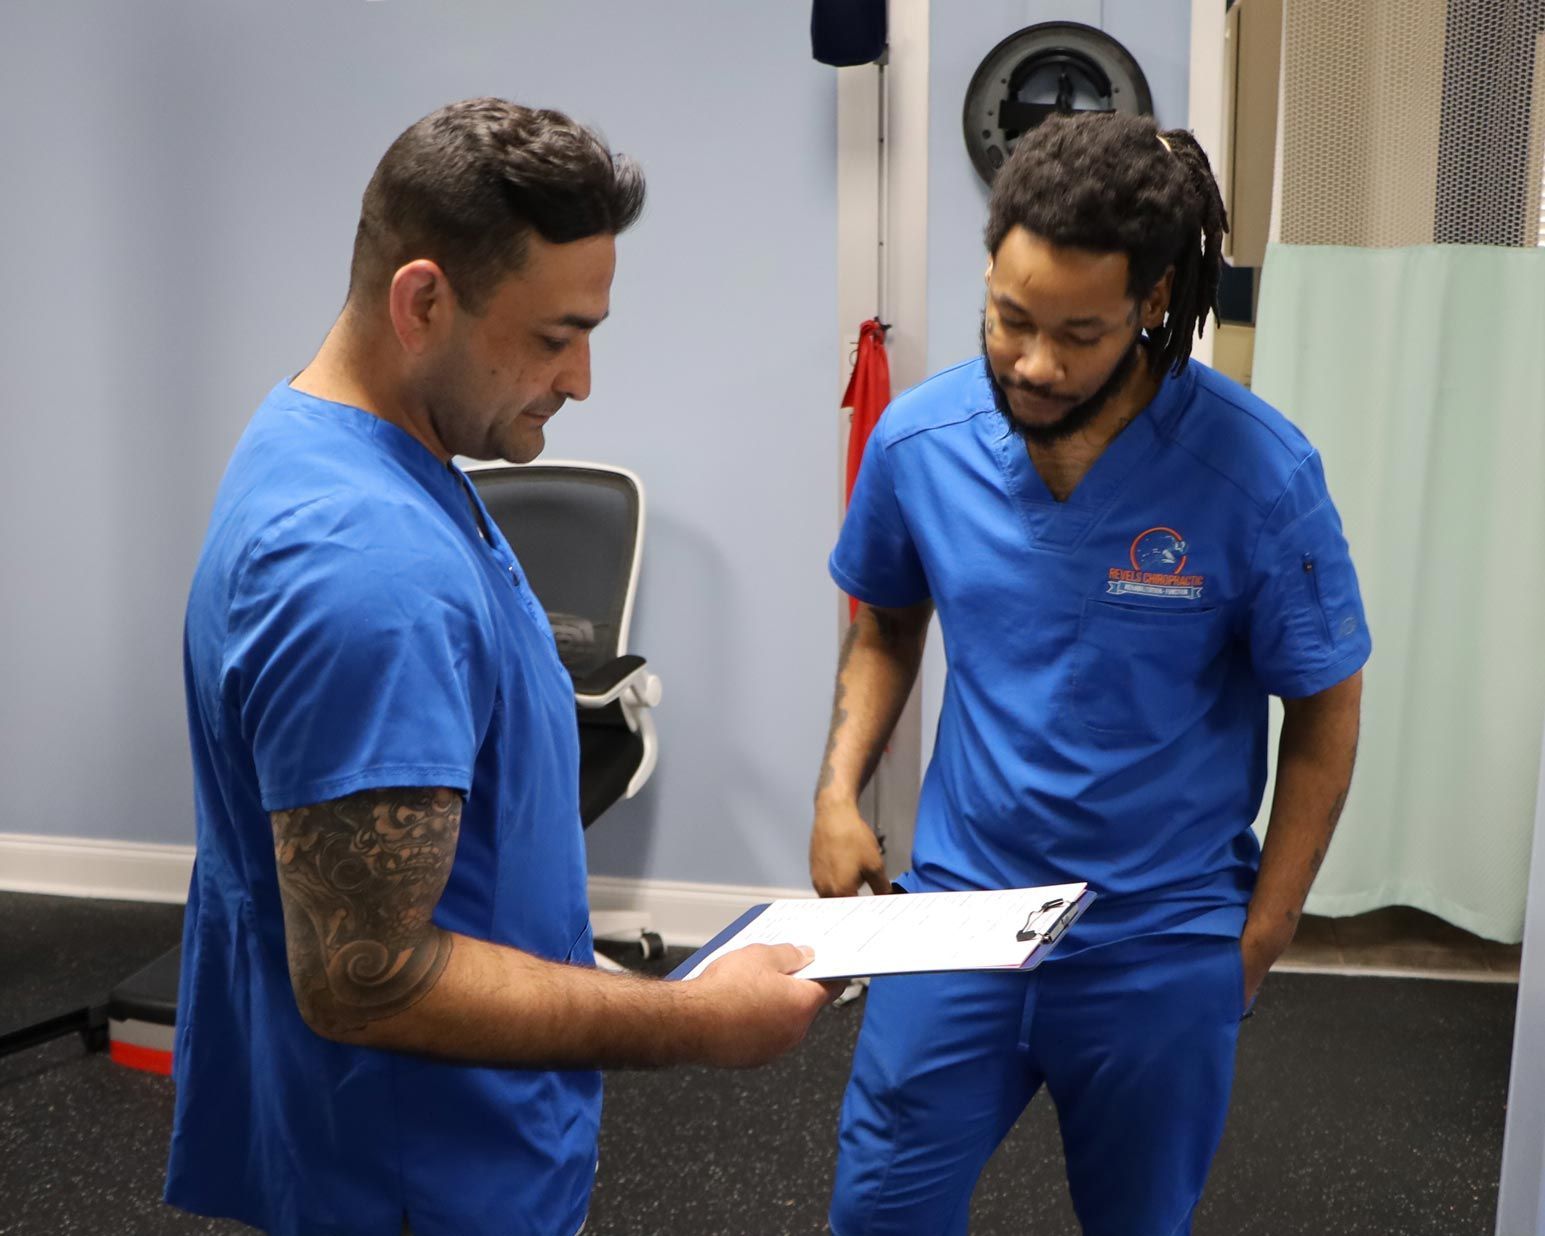 Two men in blue scrubs are standing next to each other looking at a clipboard.